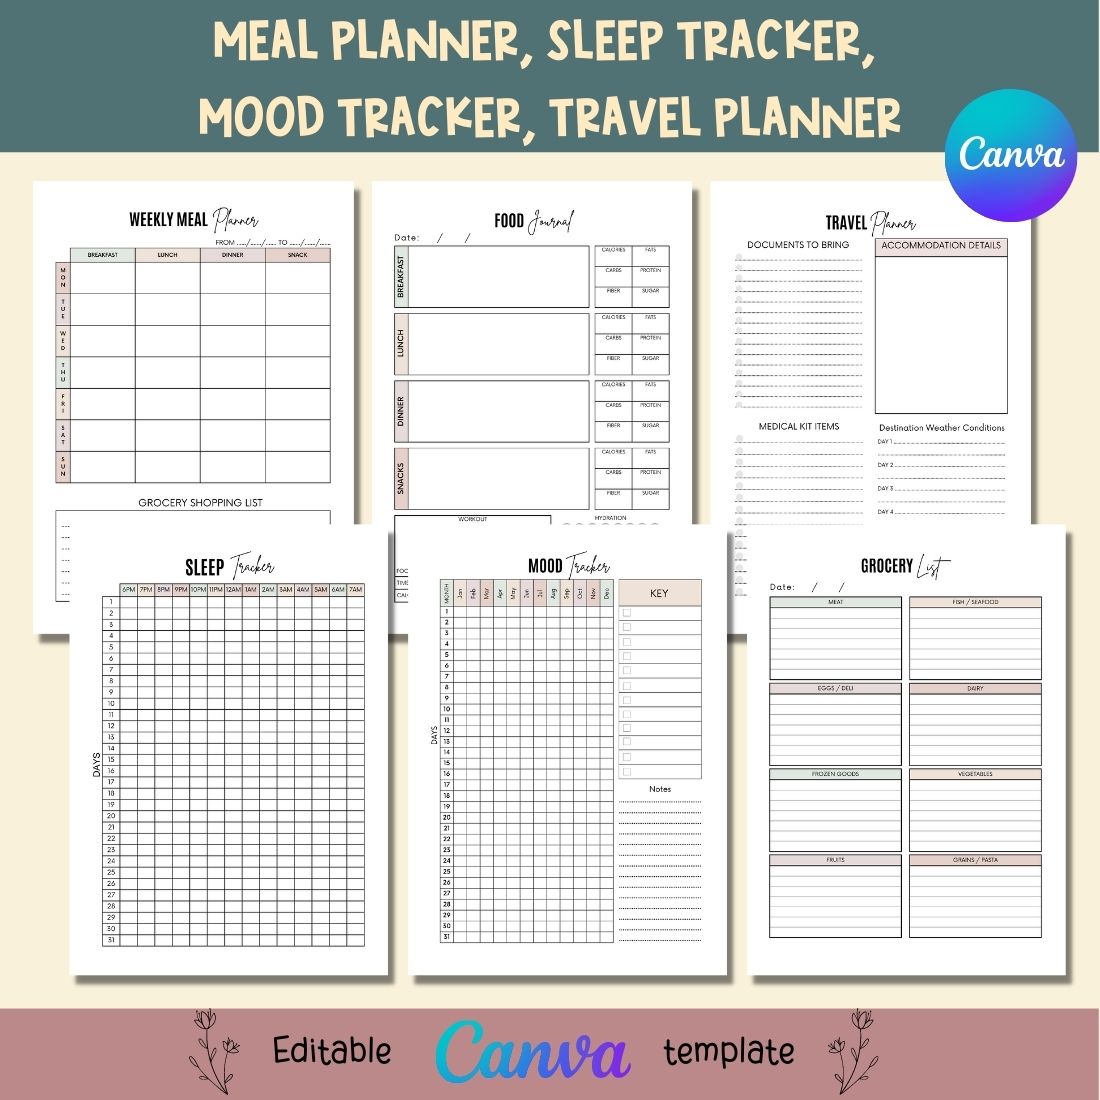 Sleep Tracker Canva Templates preview image.